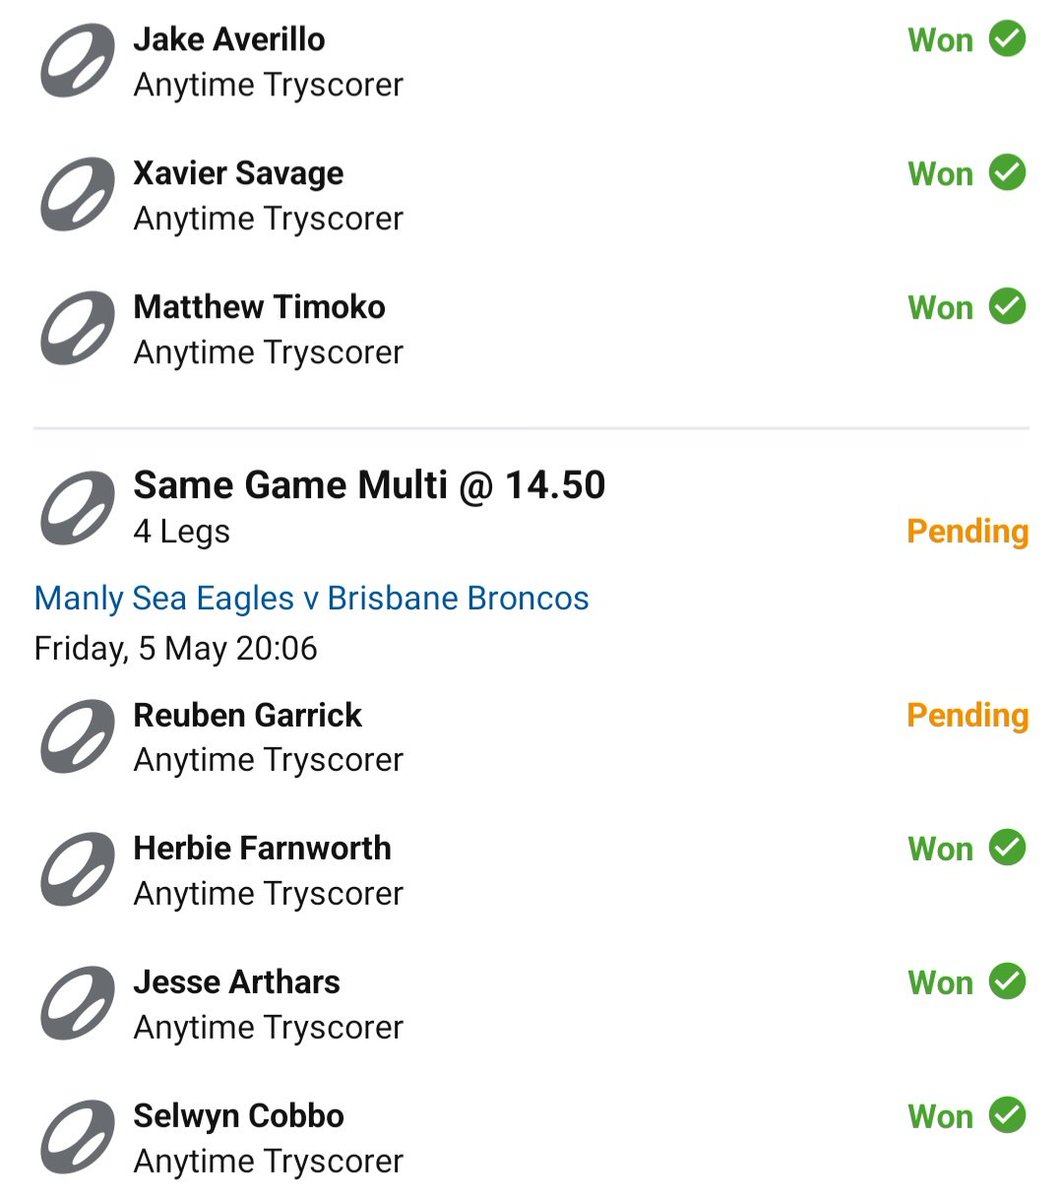 @dannytheviking @SeaEagles Gutted only put $1 on and would have won $217 . Worst part was they went Saab side pretty much the whole time.